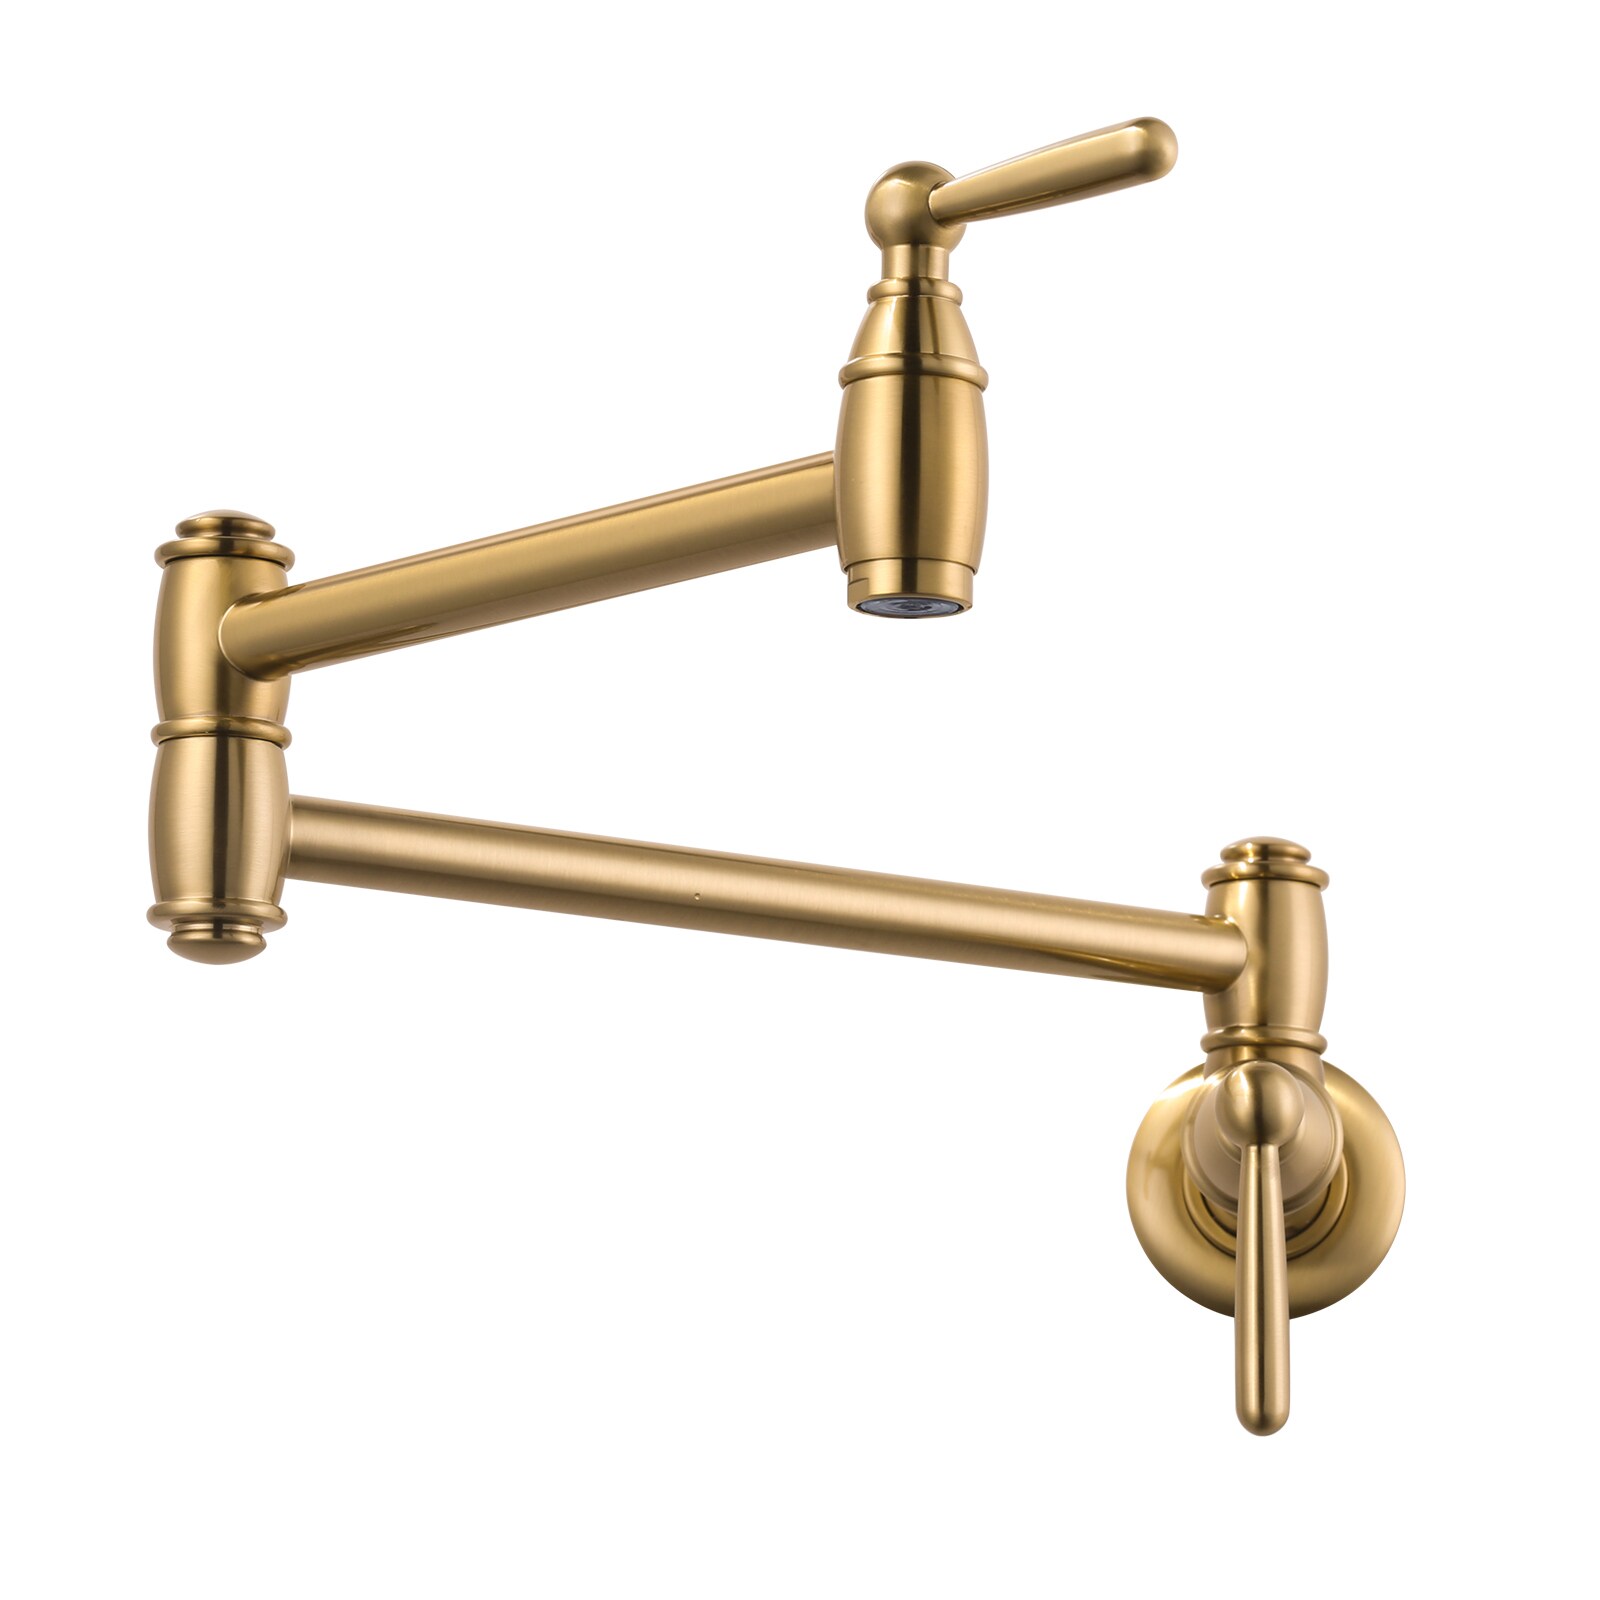 WOWOW Gold Double Handle Wall-mount Pot Filler Commercial Kitchen Faucet